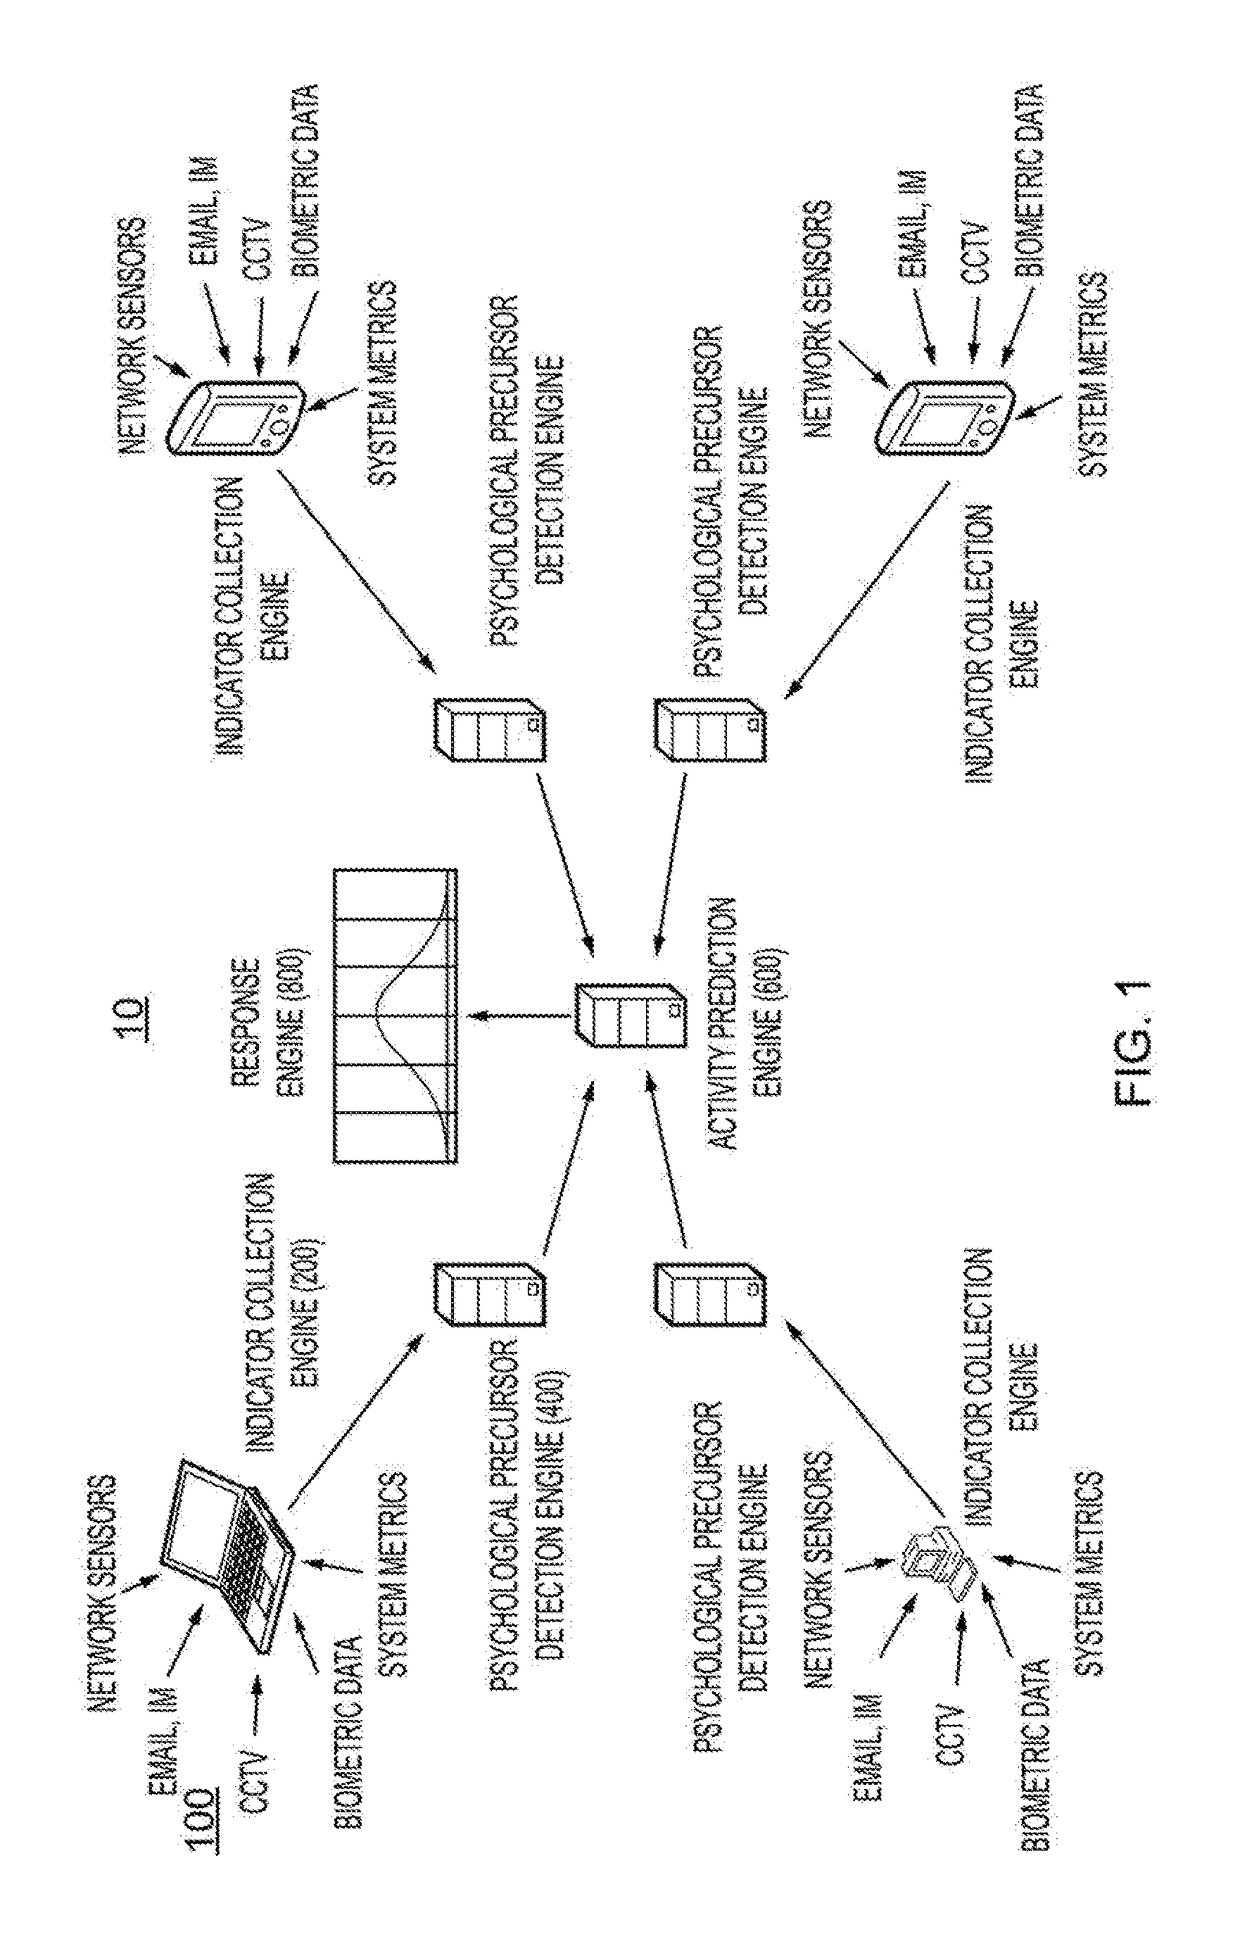 System for and method for detection of insider threats